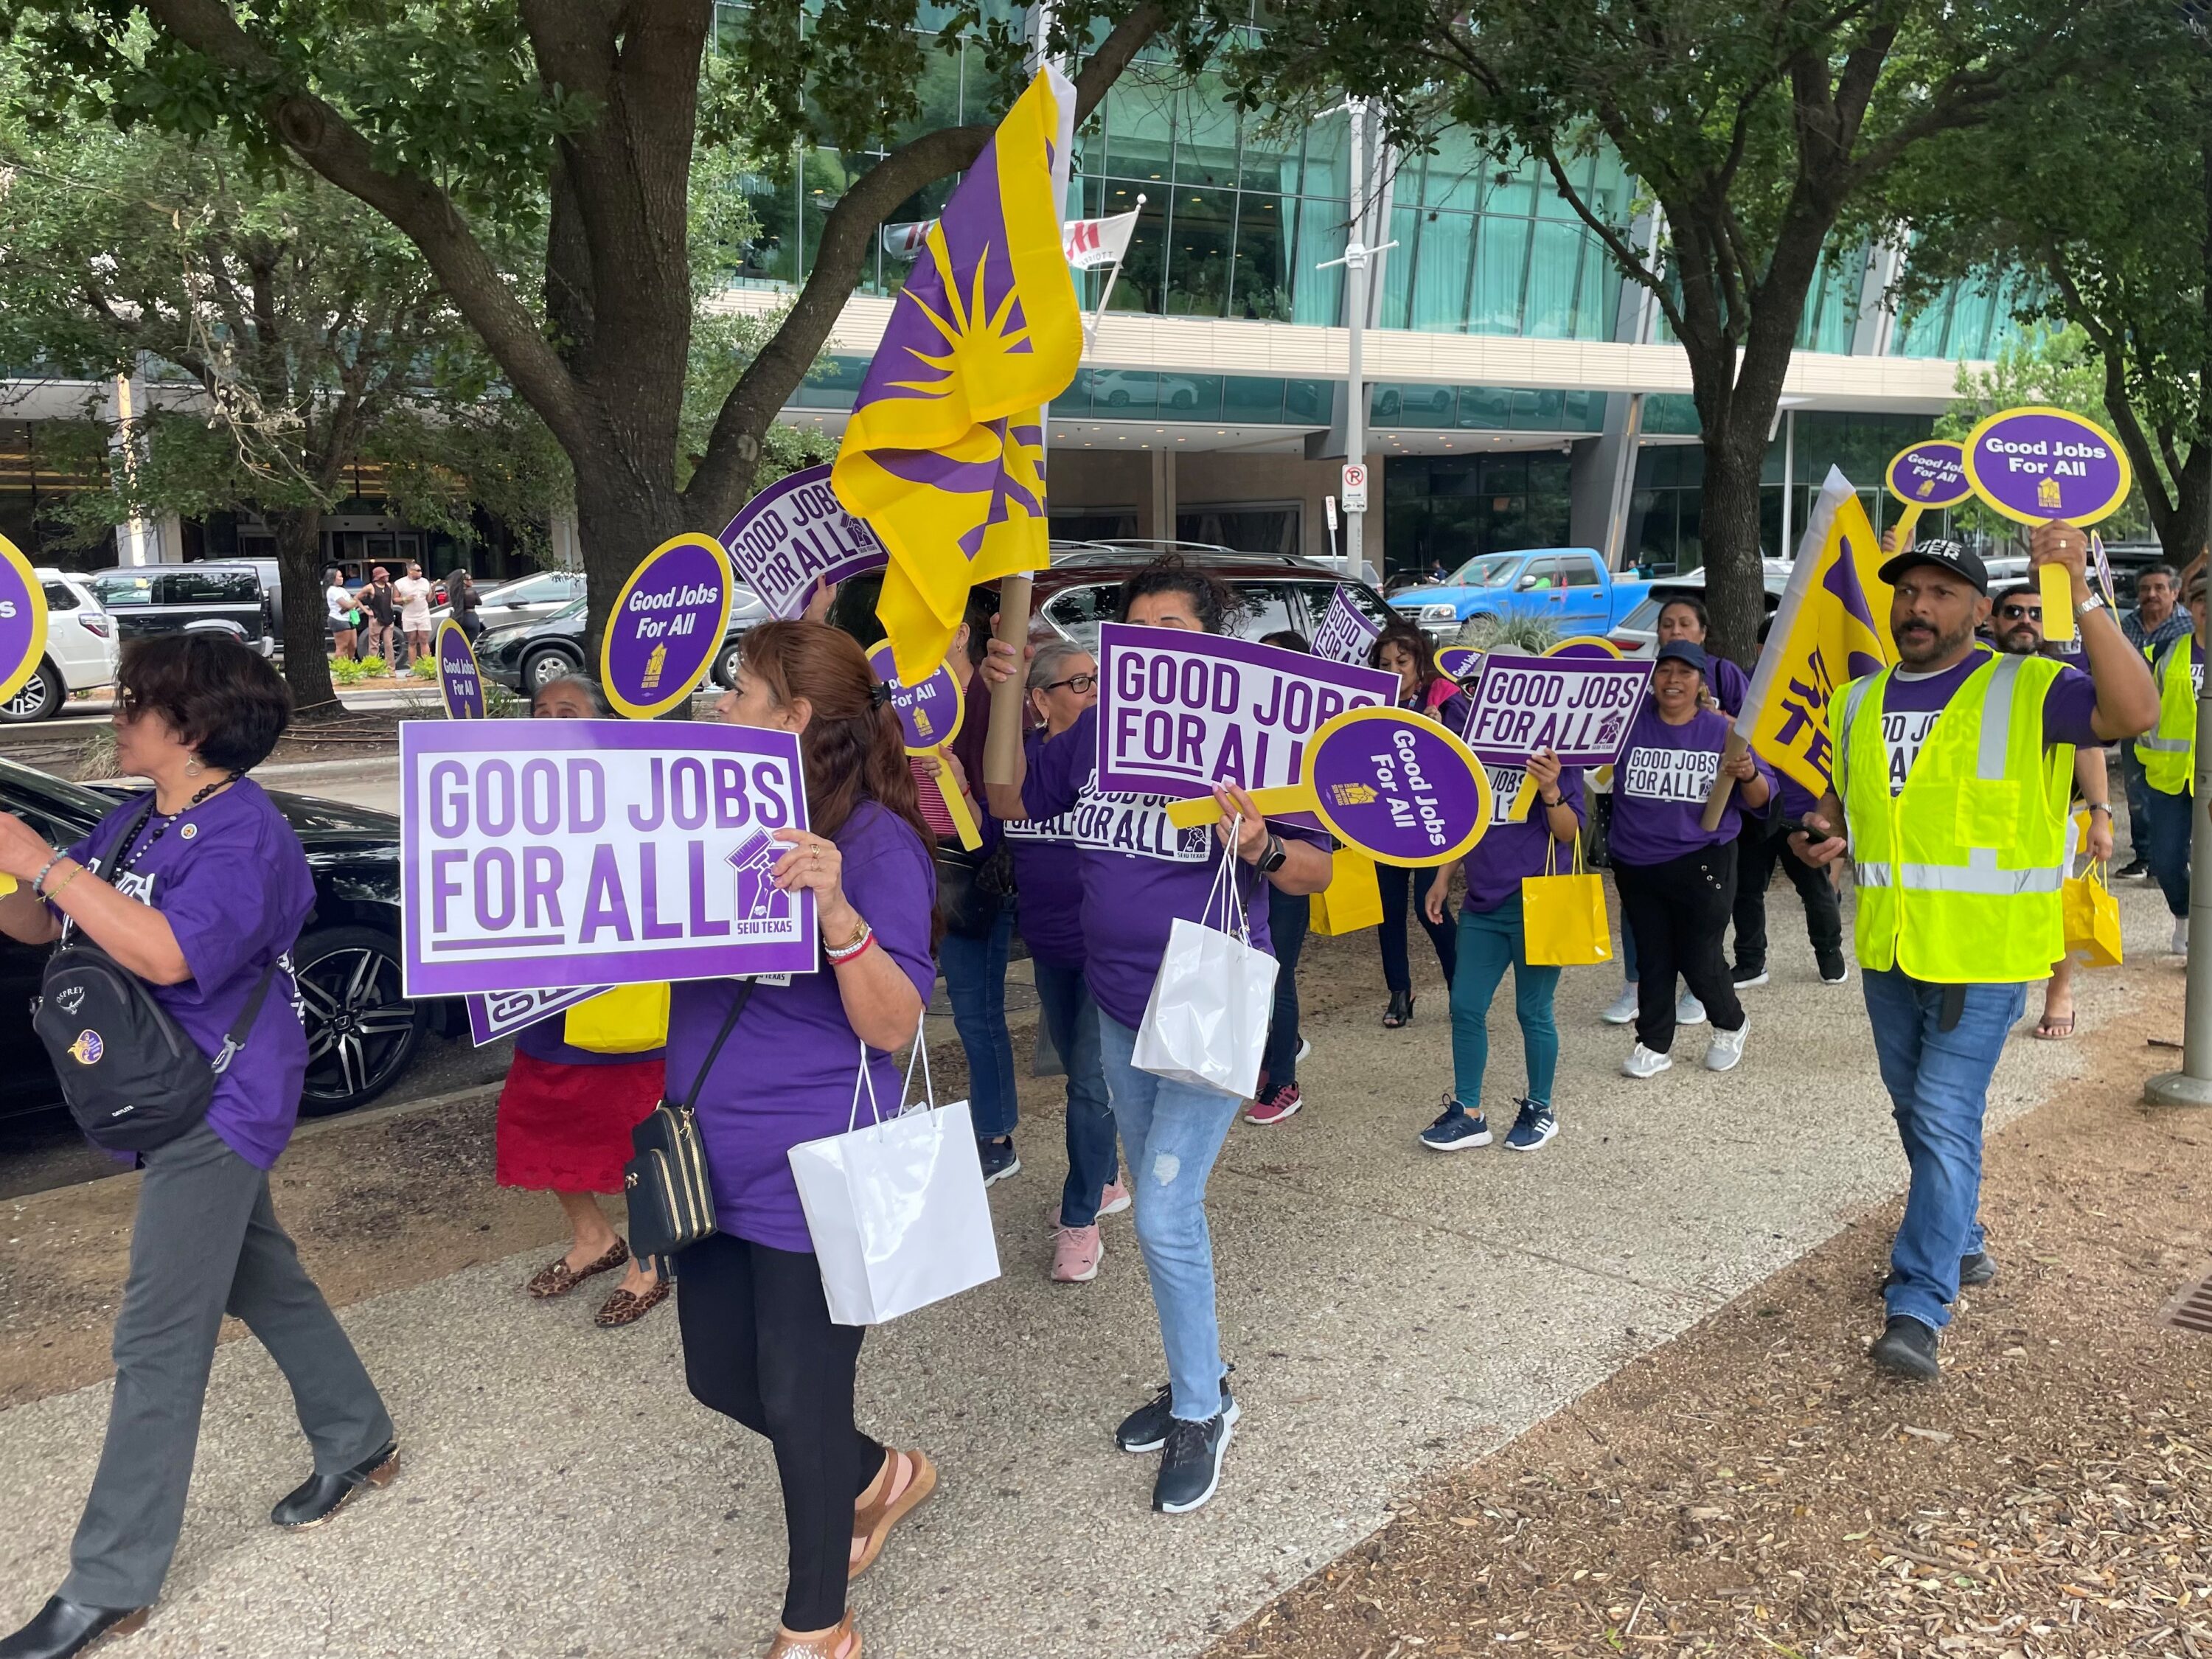 Members of the Service Employees International Union in Houston march downtown in support of higher wages for janitorial workers. They are wearing purple and holding signs that read "Good jobs for all!"